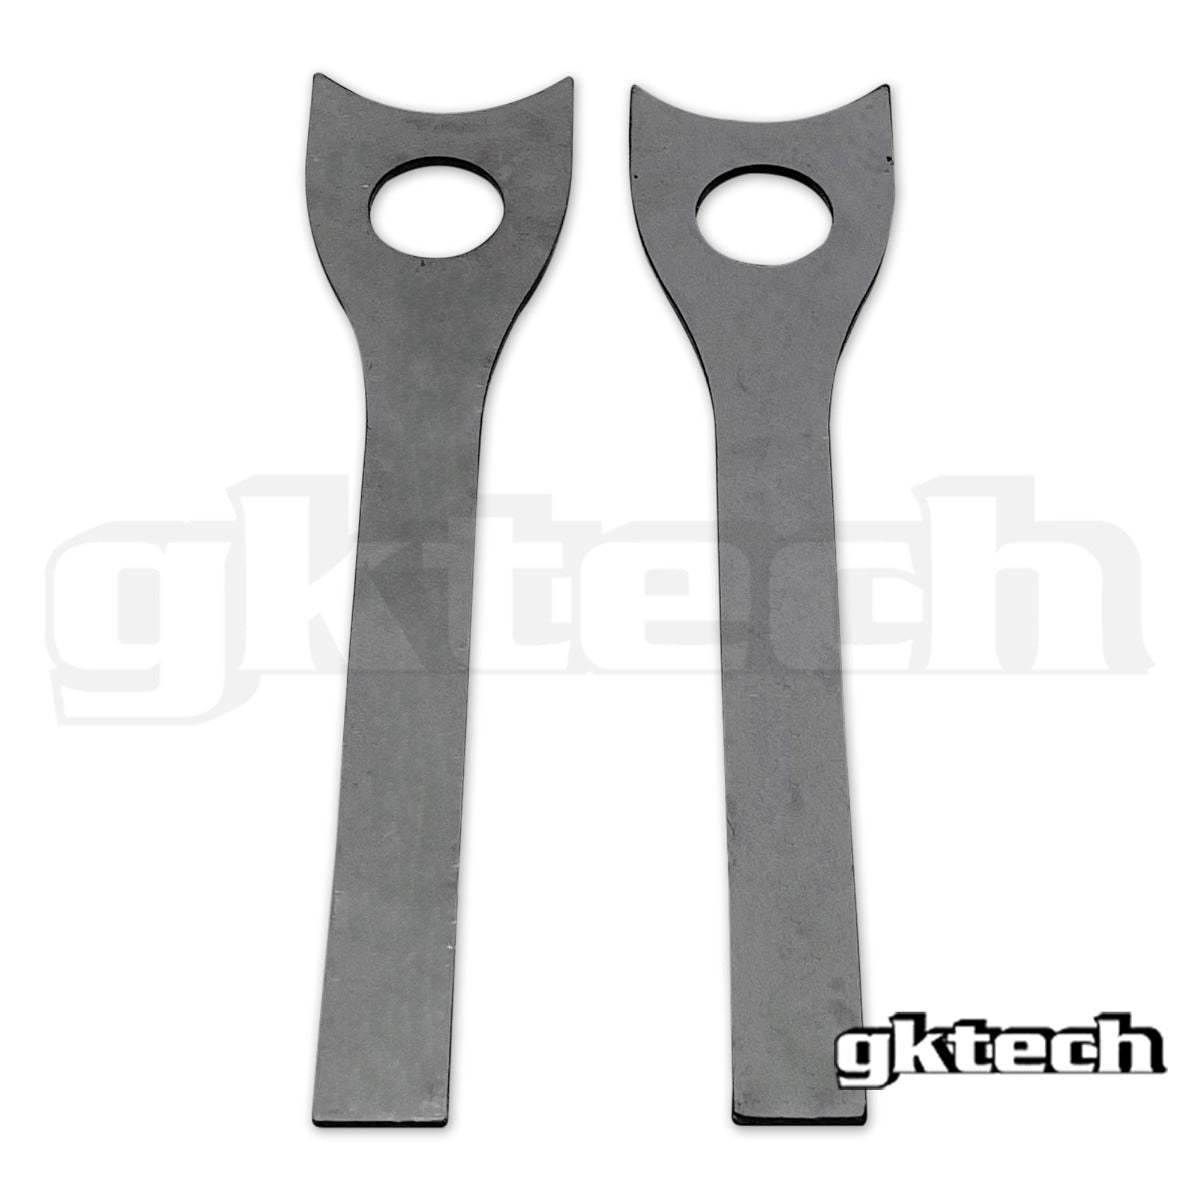 S13 240sx/Silvia rear traction arm weld in reinforcement plates